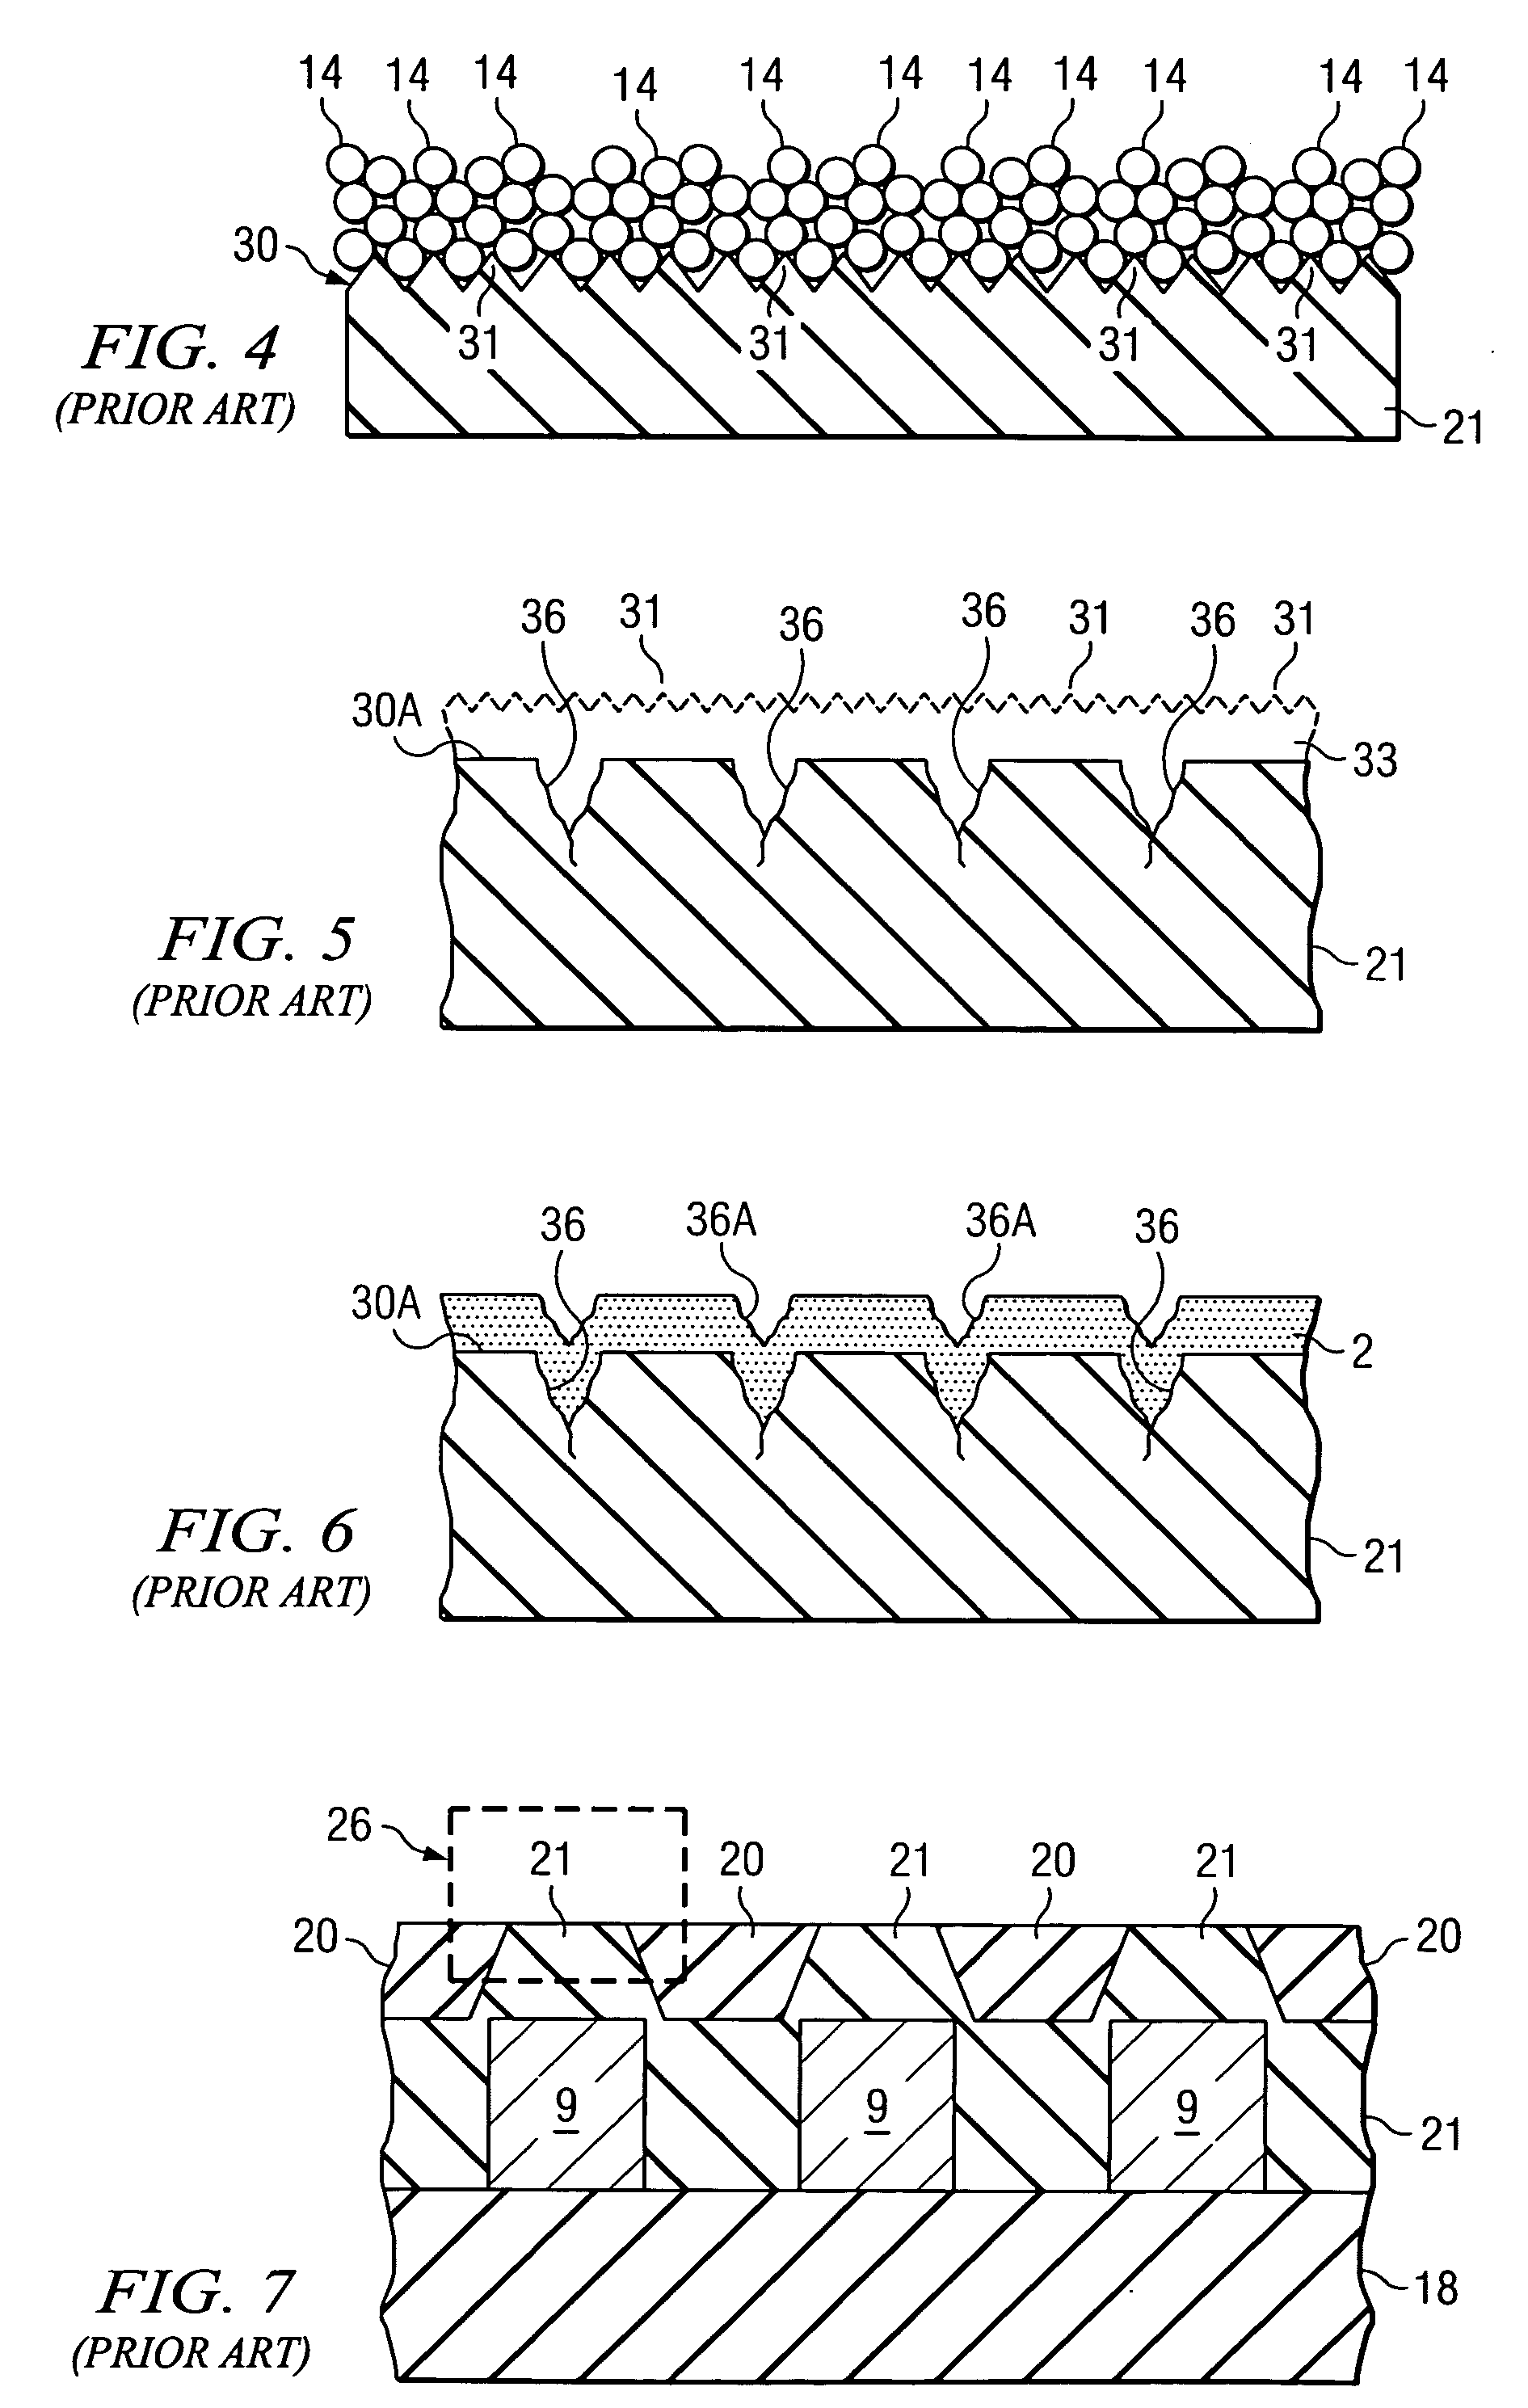 Structure and method for minimizing substrate effect on nucleation during sputtering of thin film resistors